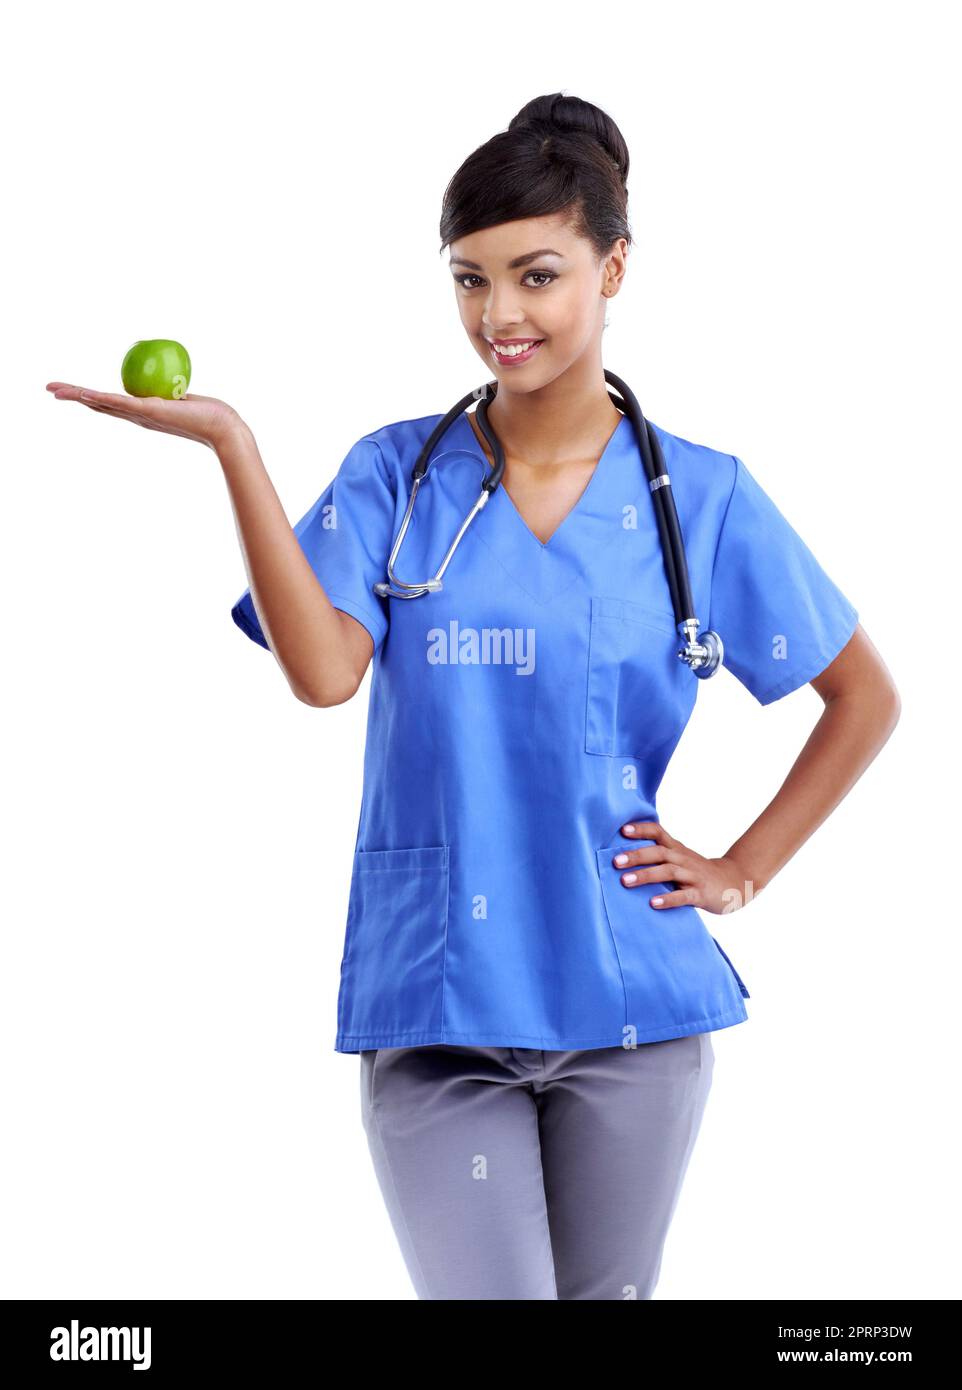 So many vitamins packed in a little snack. Studio shot of a young medical professional holding an apple isolated on white. Stock Photo